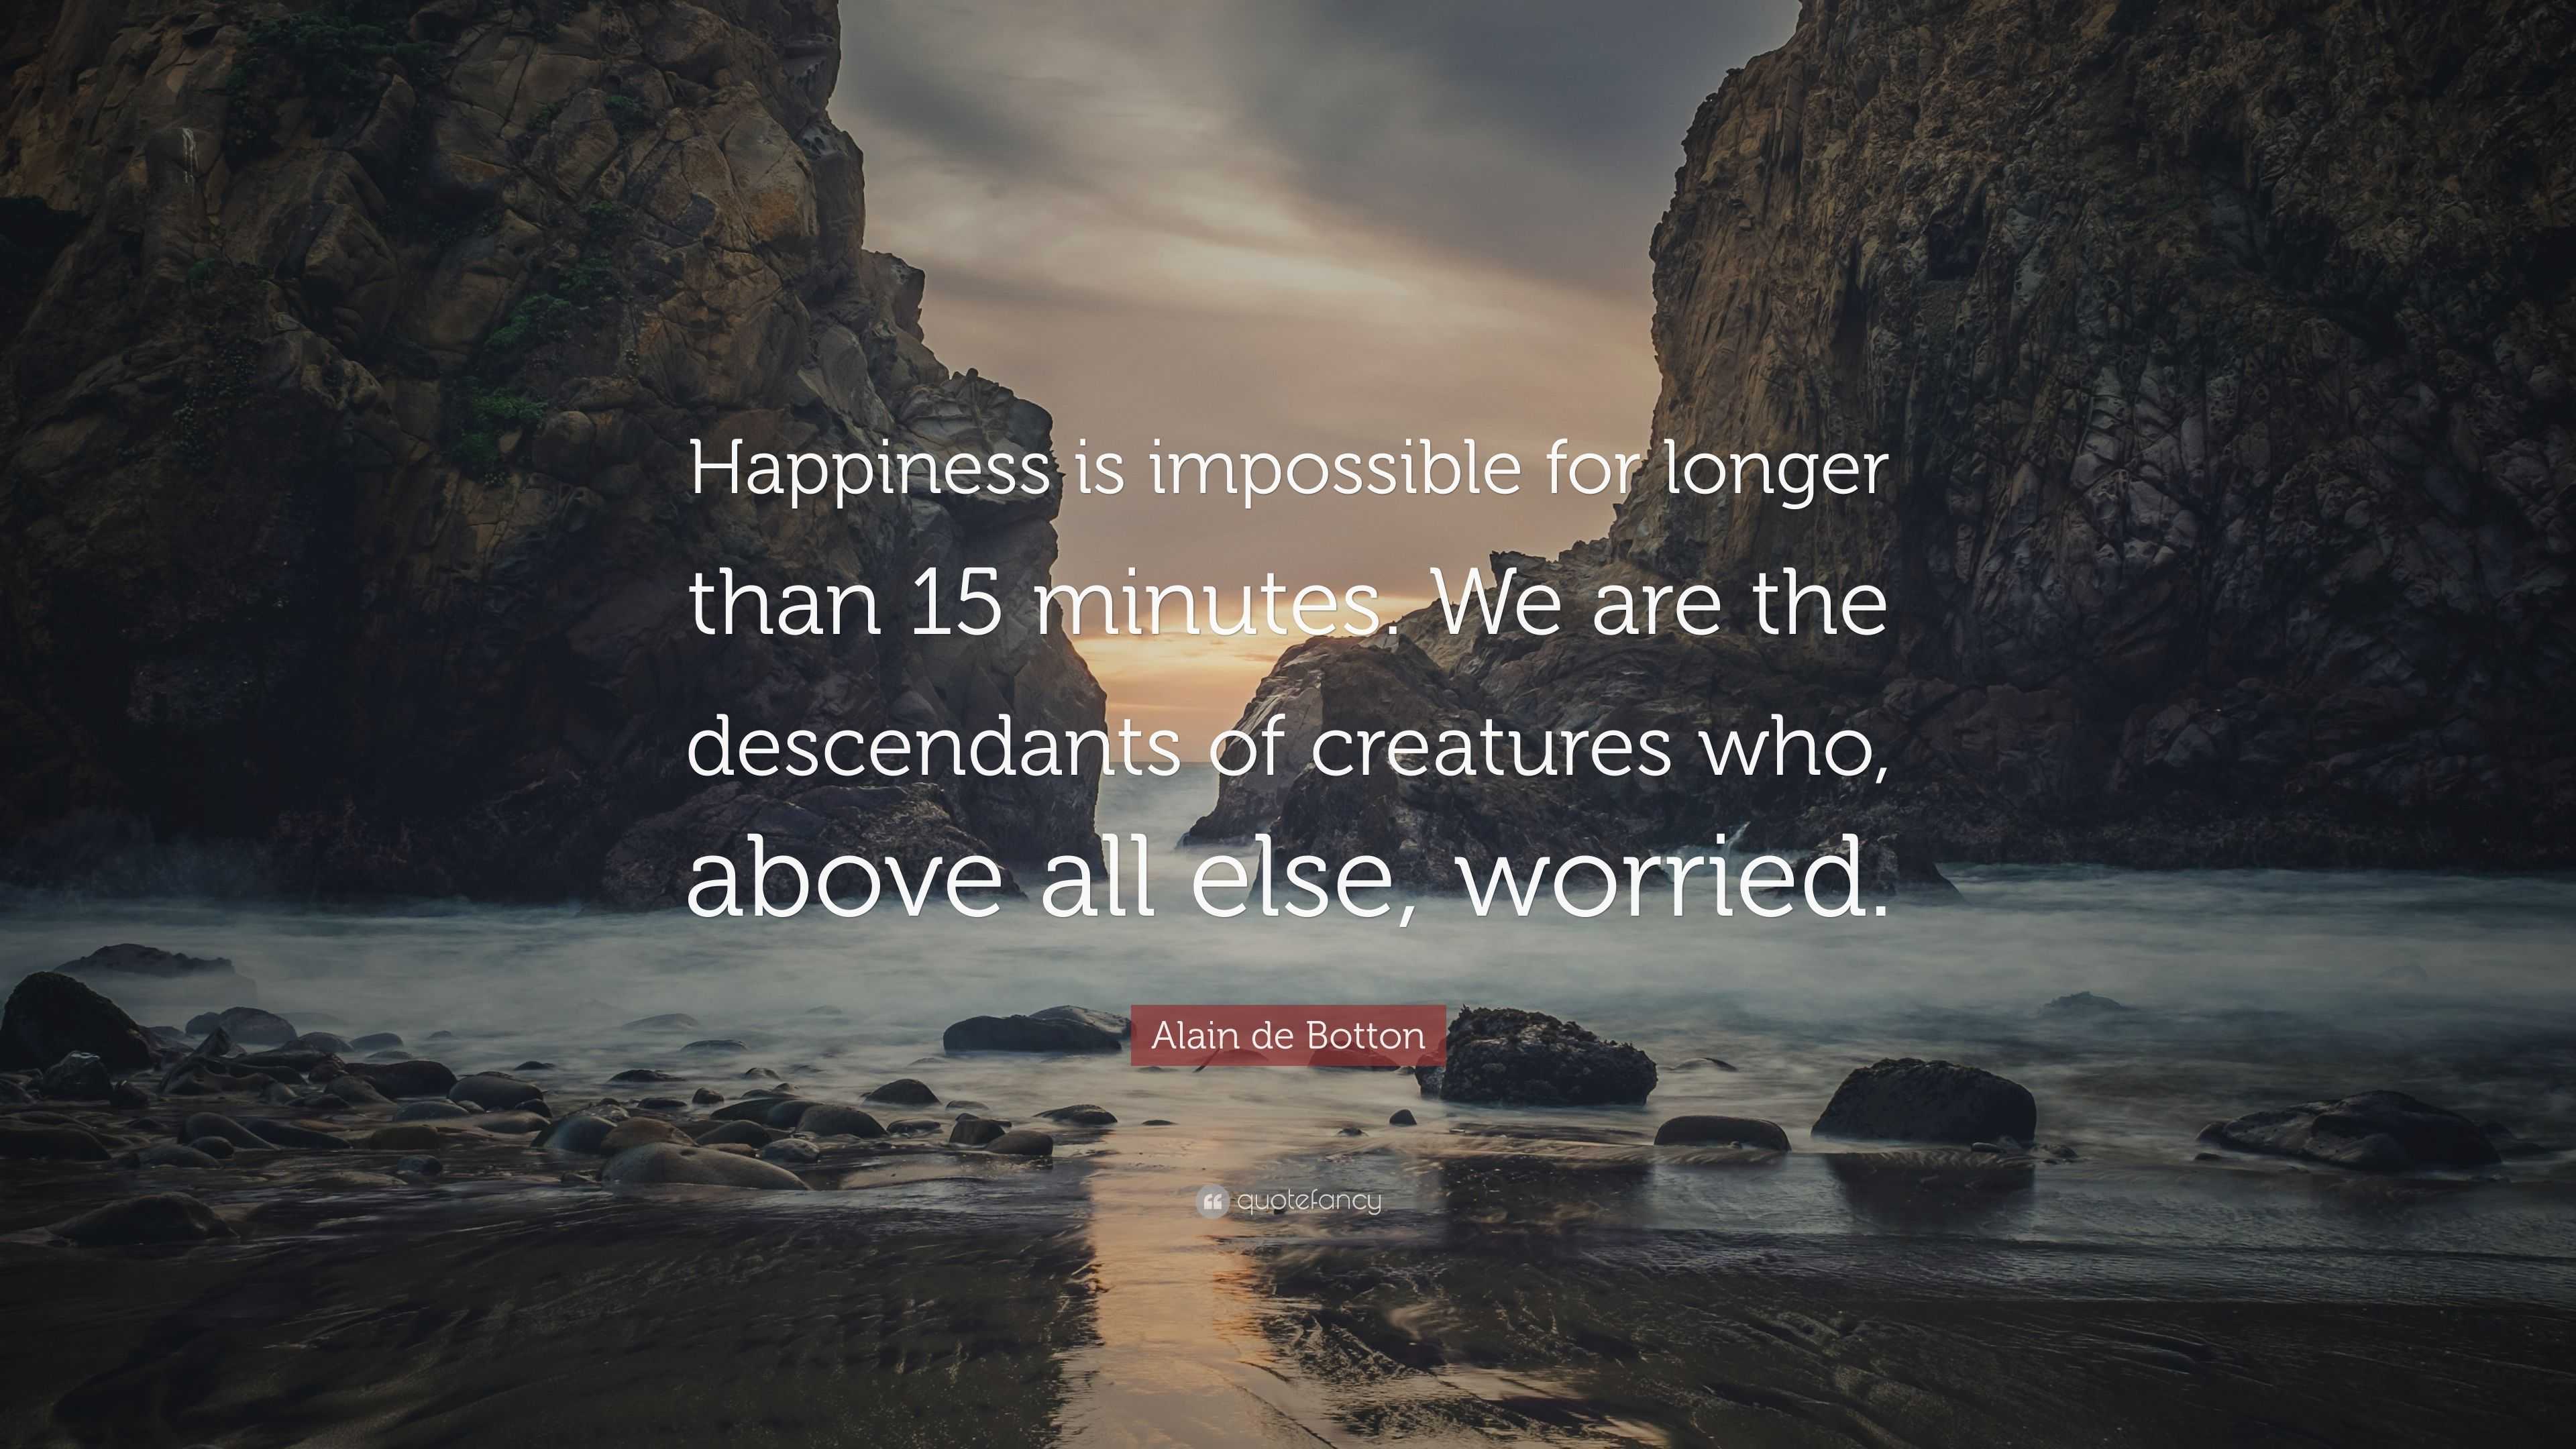 Alain de Botton Quote: “Happiness is impossible for longer than